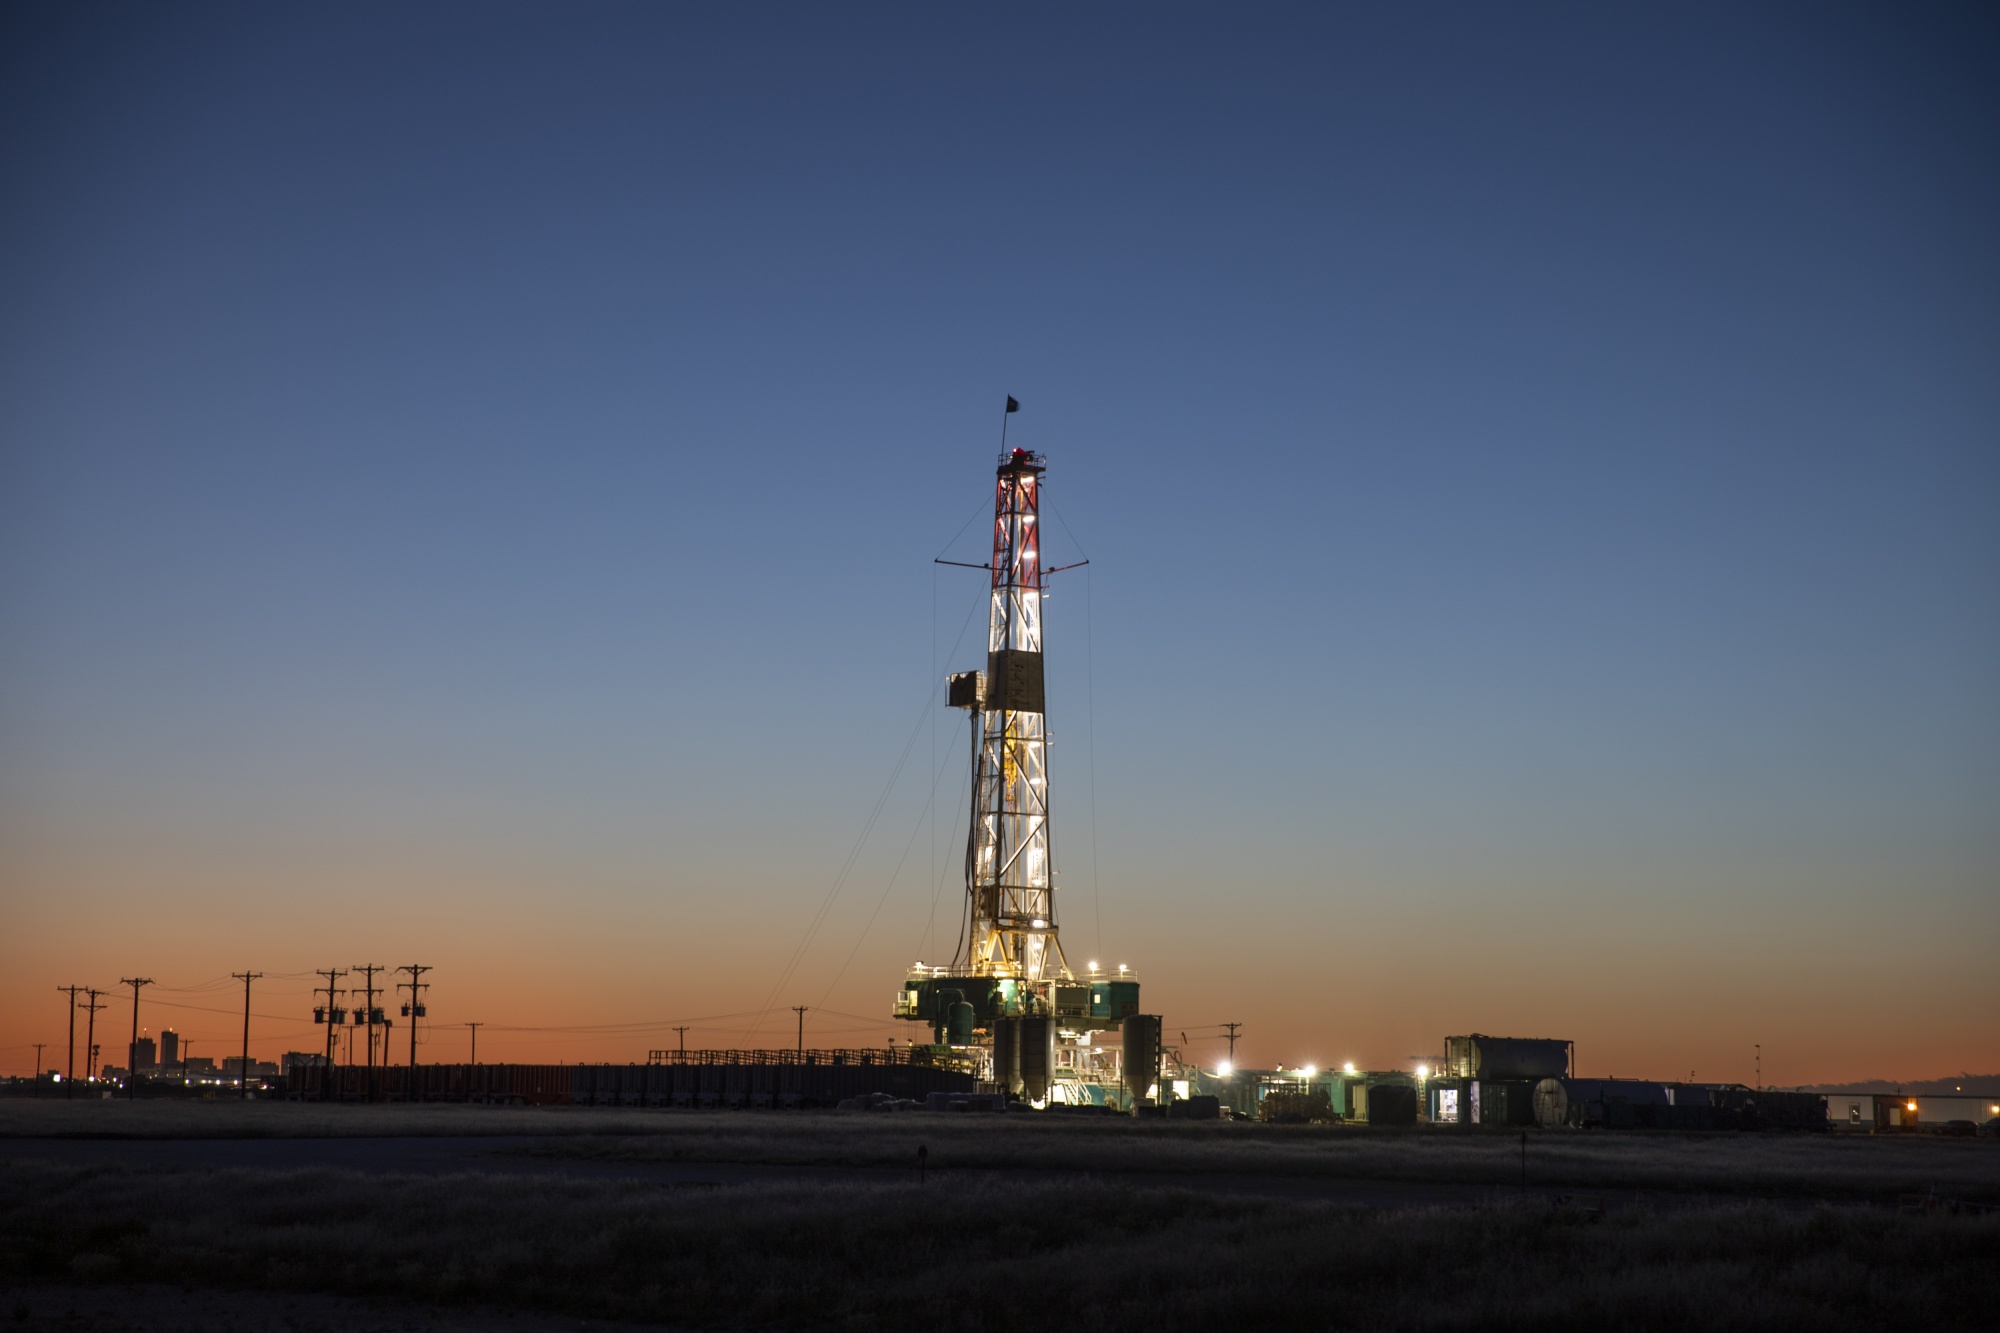 An active oil drilling rig in Midland, Texas.